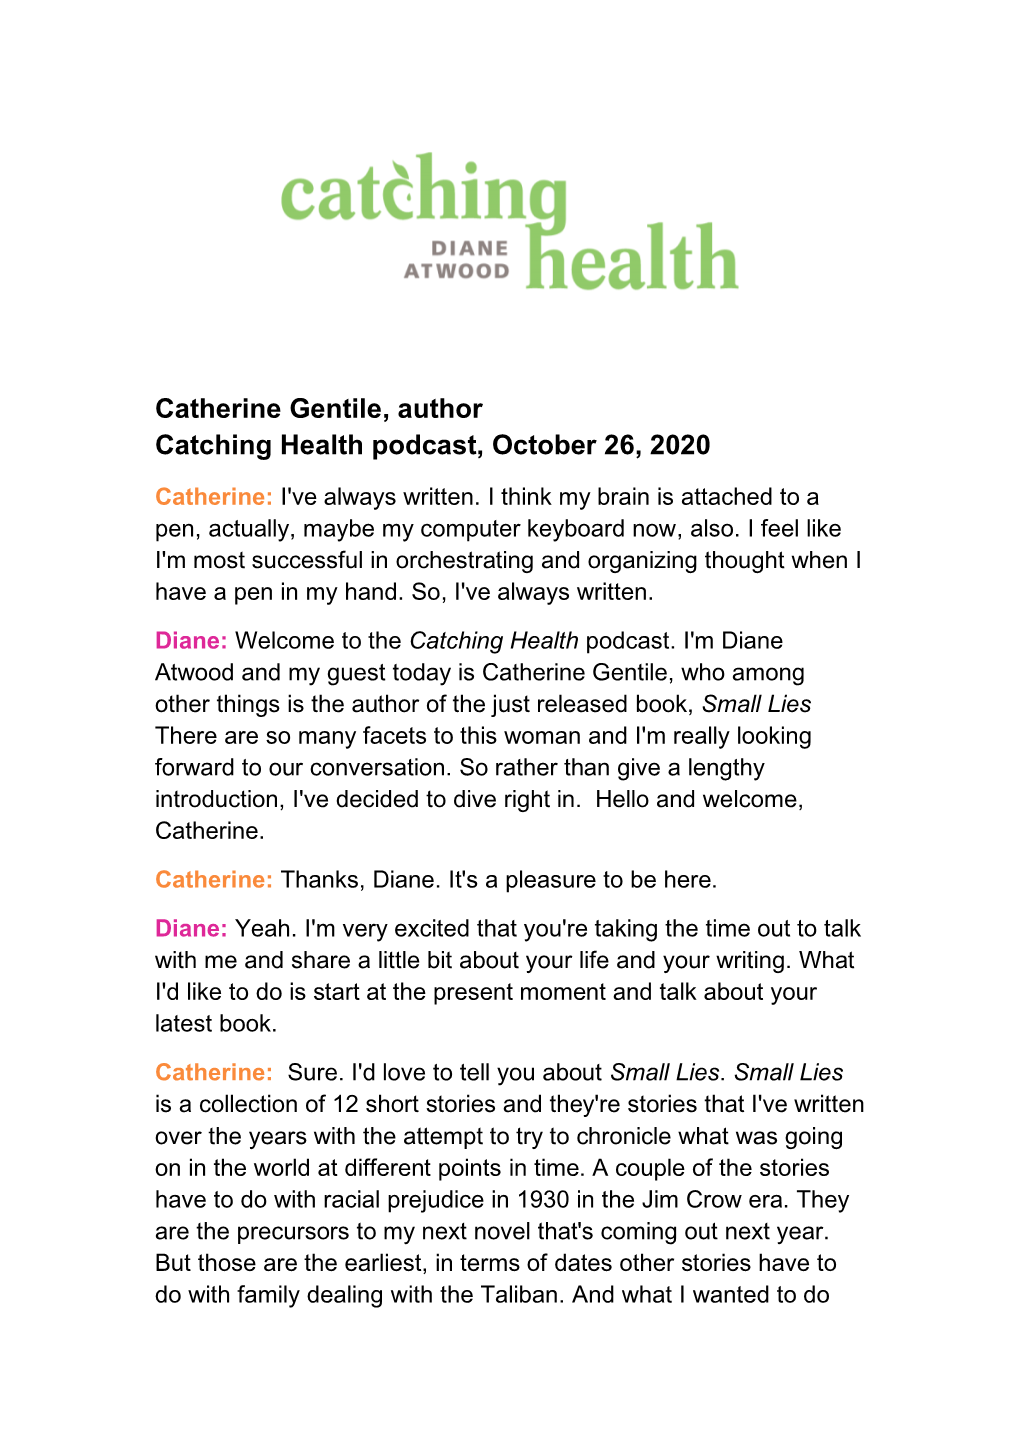 Catherine Gentile, Author Catching Health Podcast, October 26, 2020